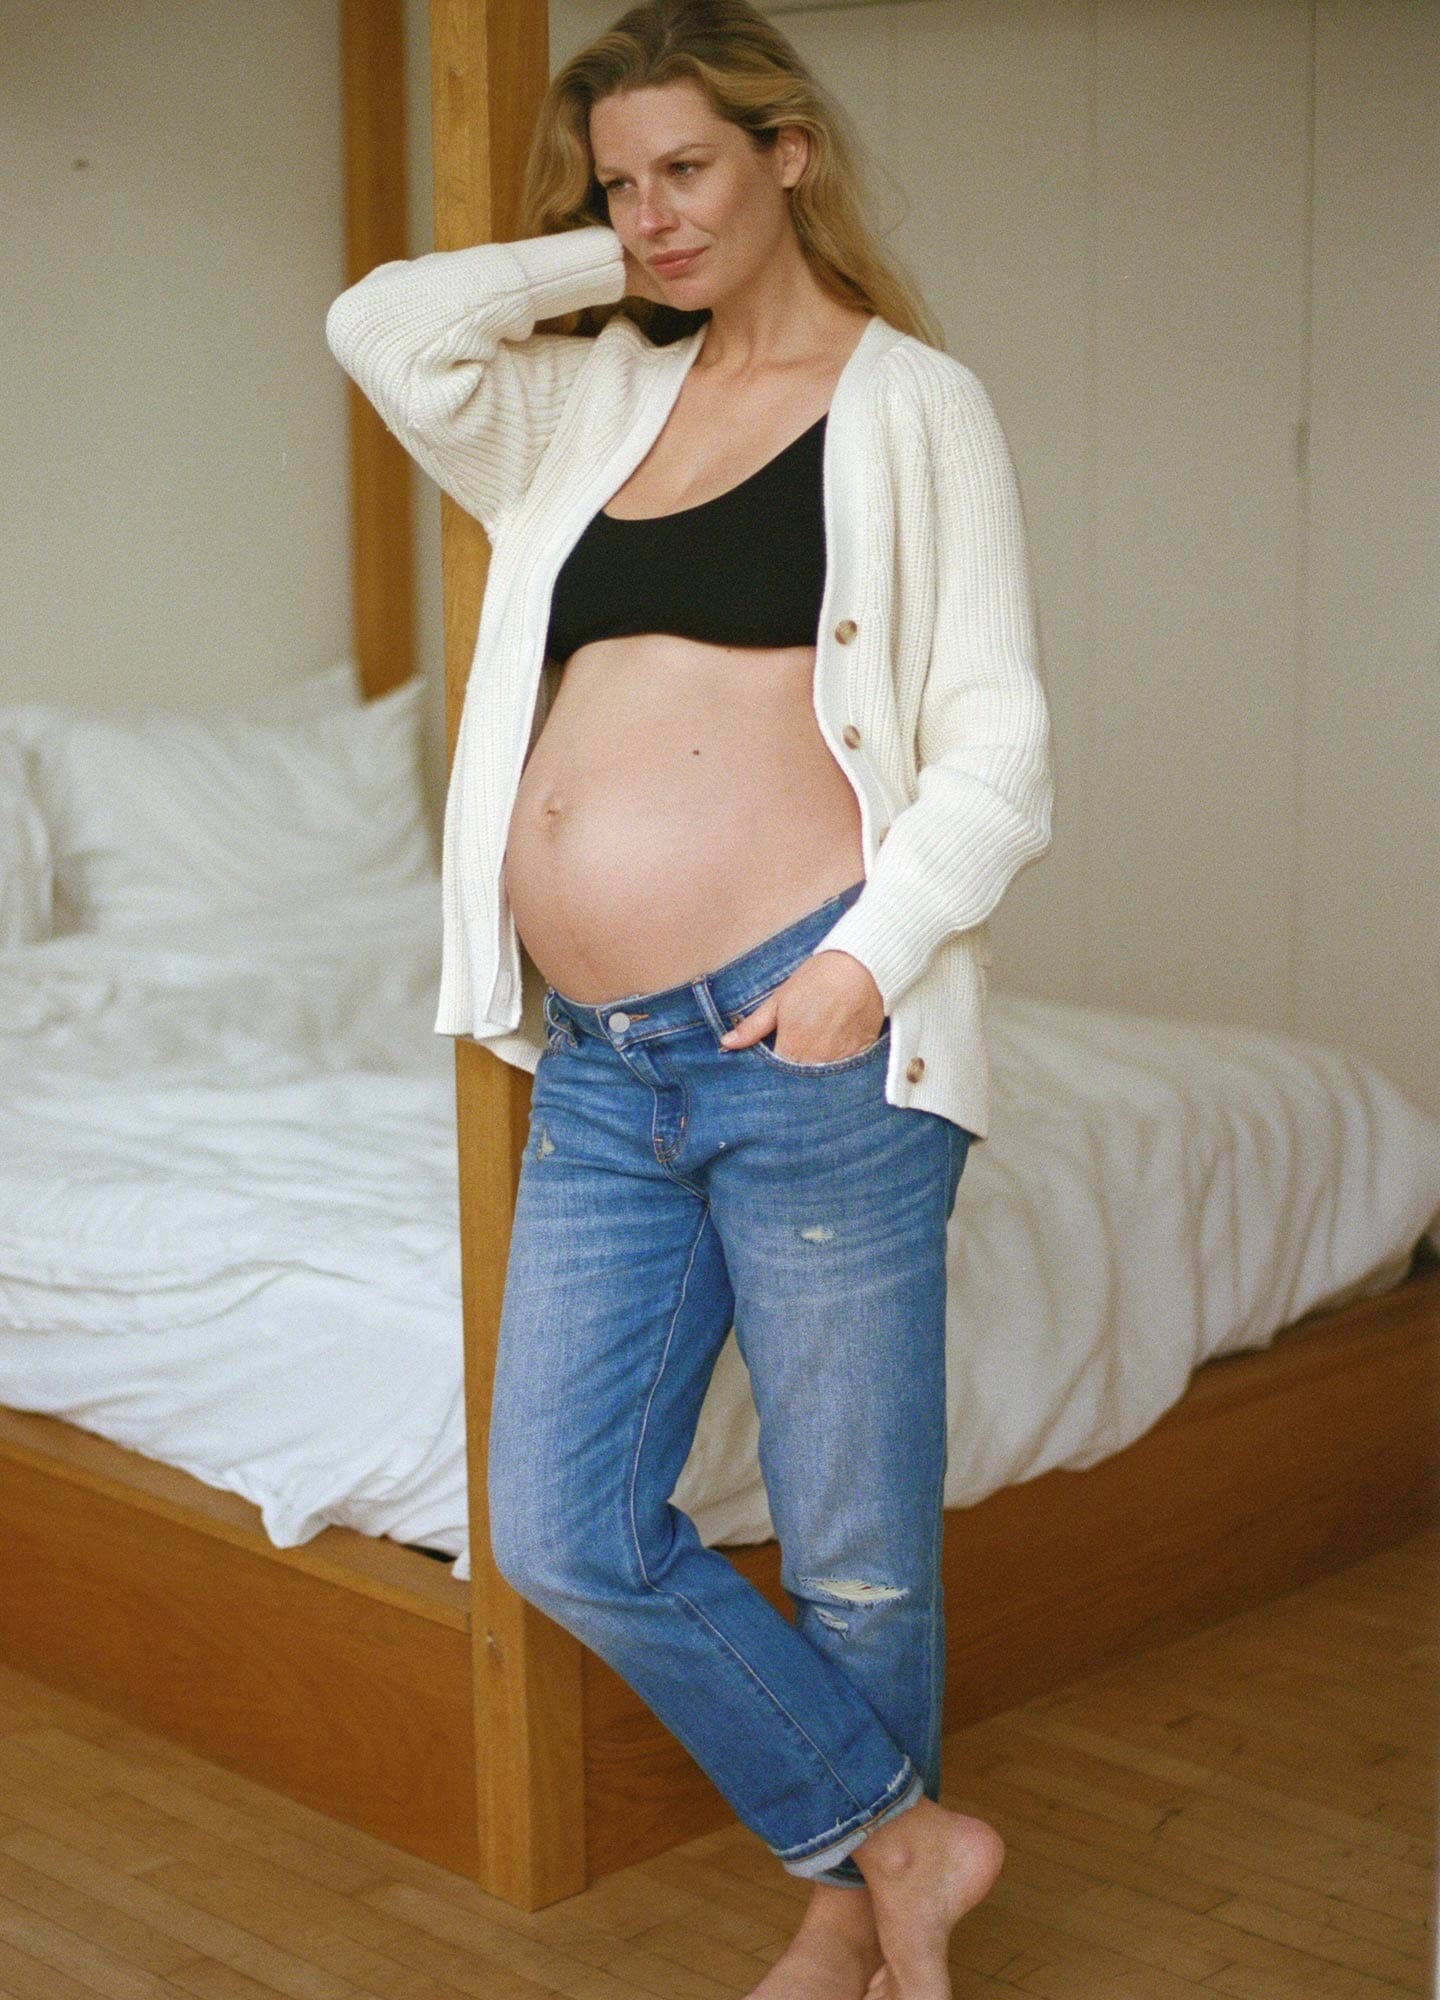 Guide to our maternity pants